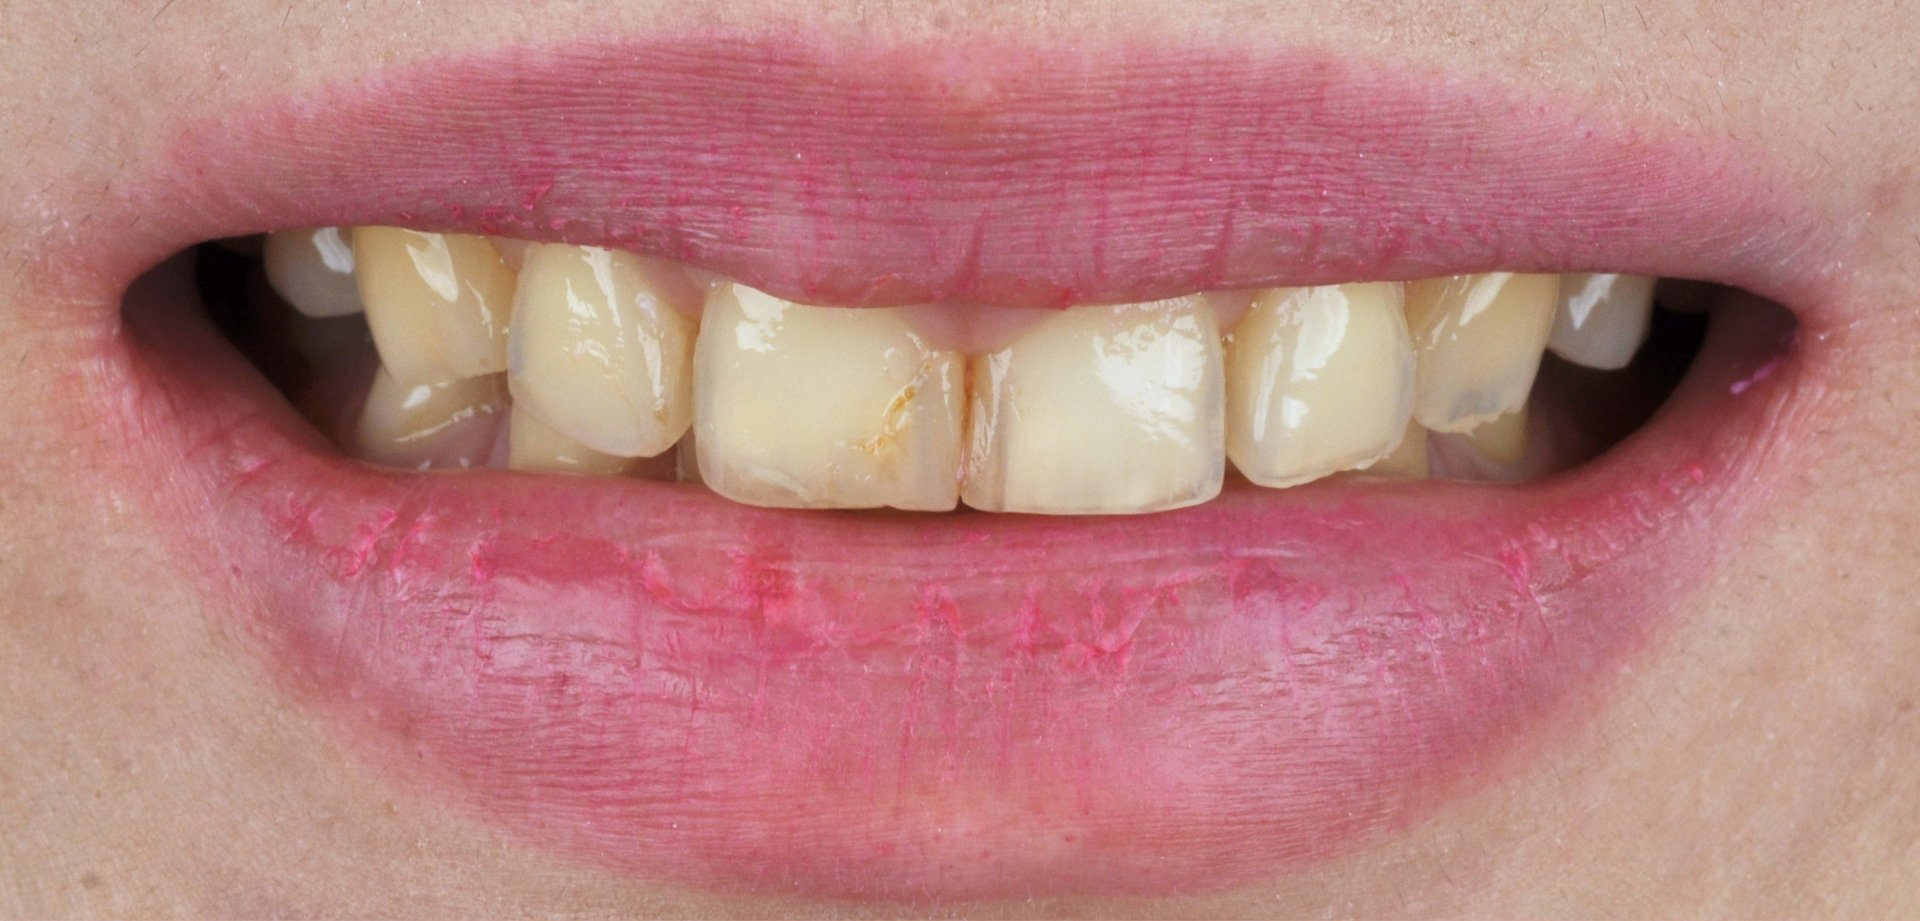 A close up of a person 's mouth with yellow teeth.